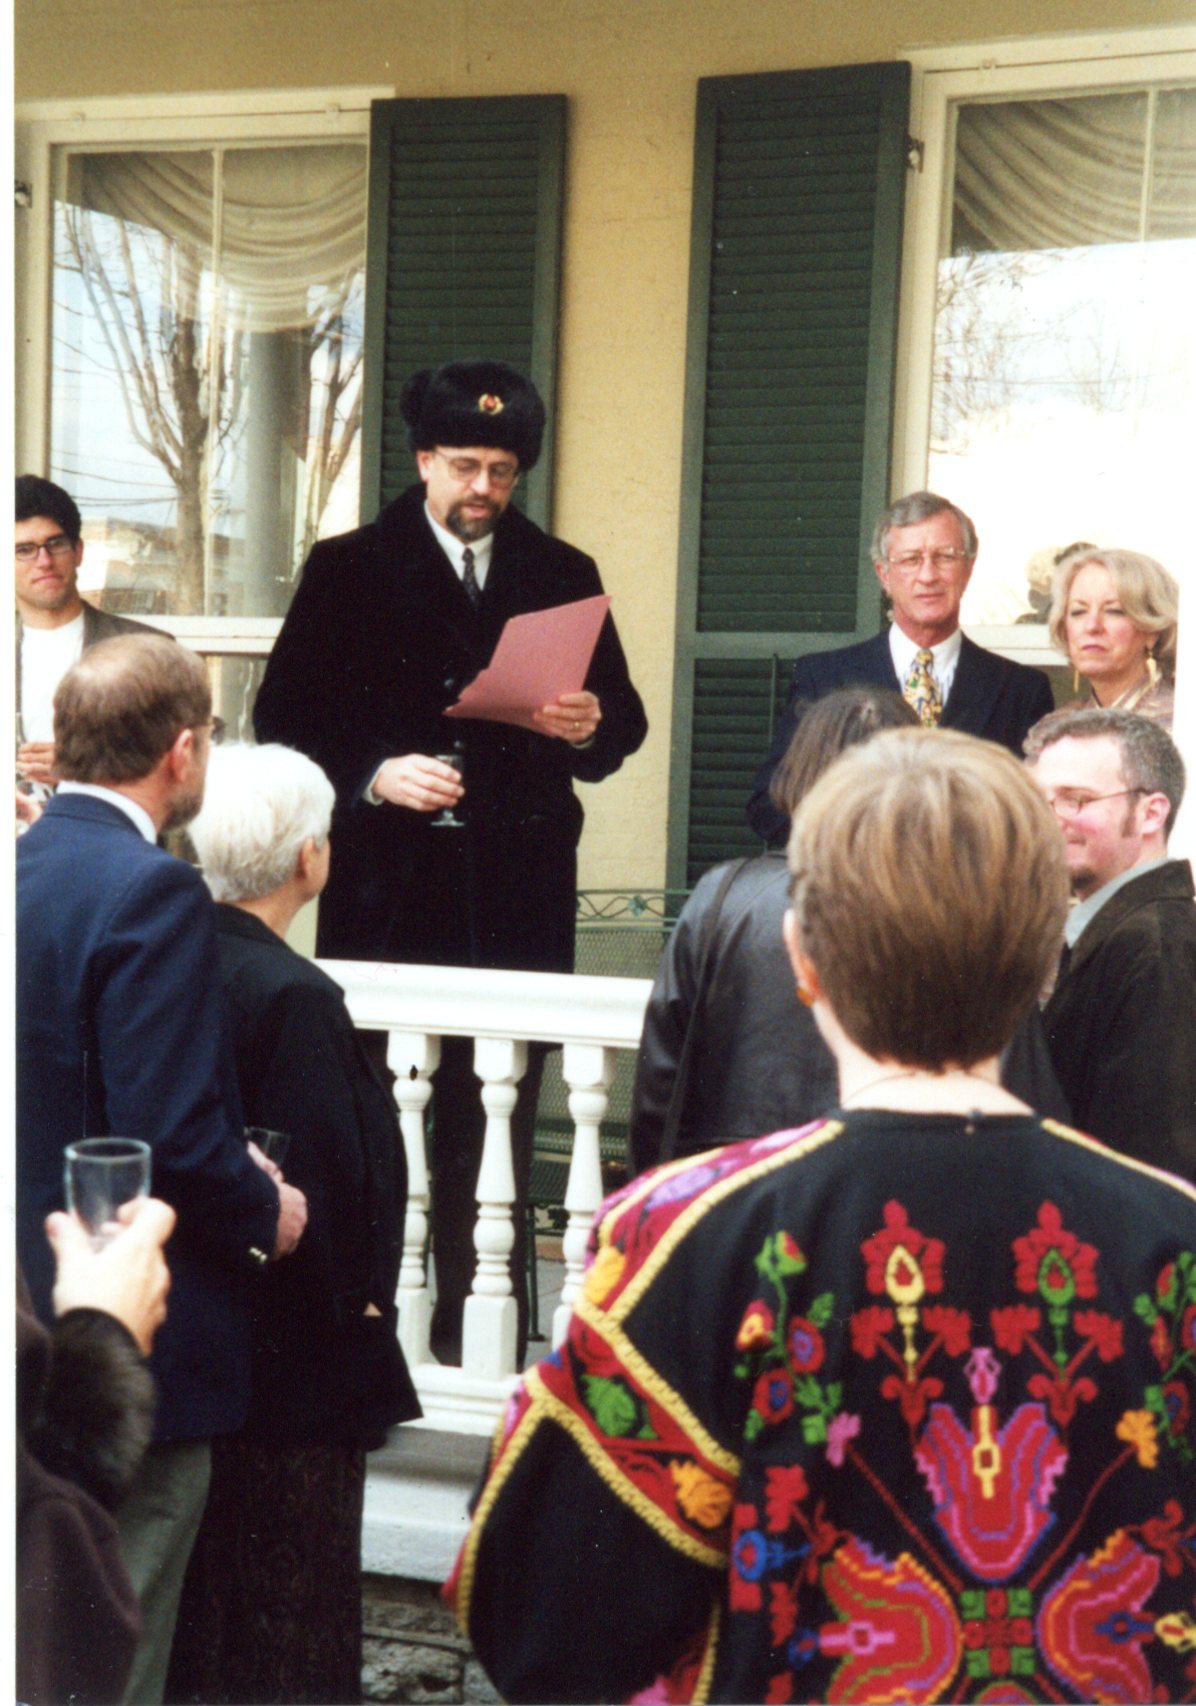  Opening Remarks at Alexander House